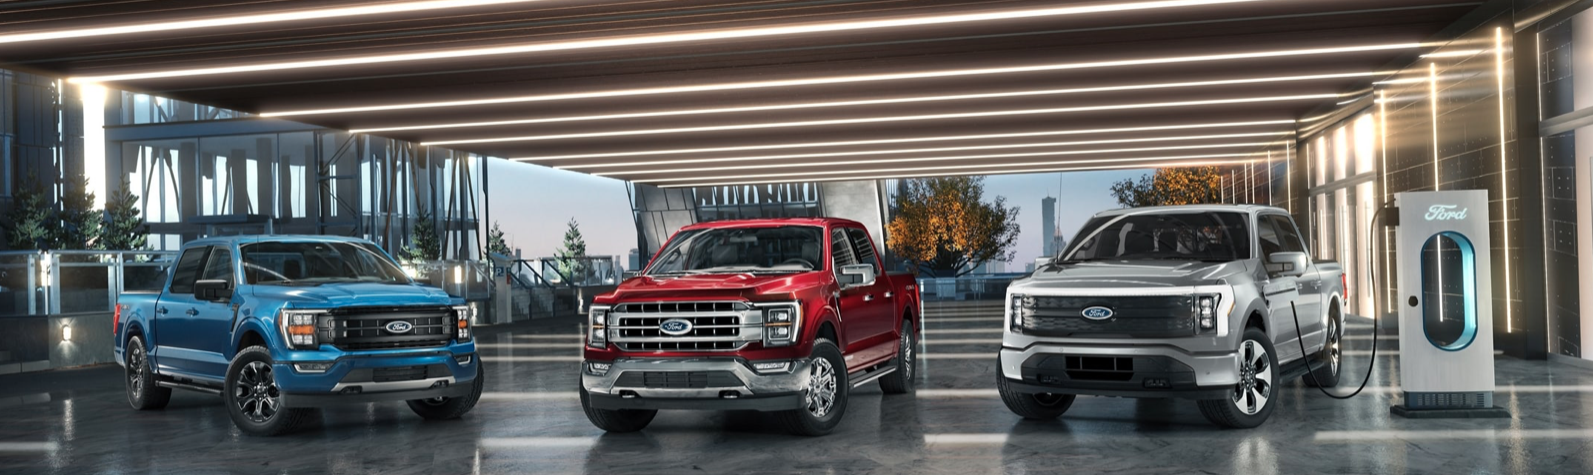 Three 2023 Ford F-150 trucks - one blue, one red, and one silver - parked in an expansive garage.